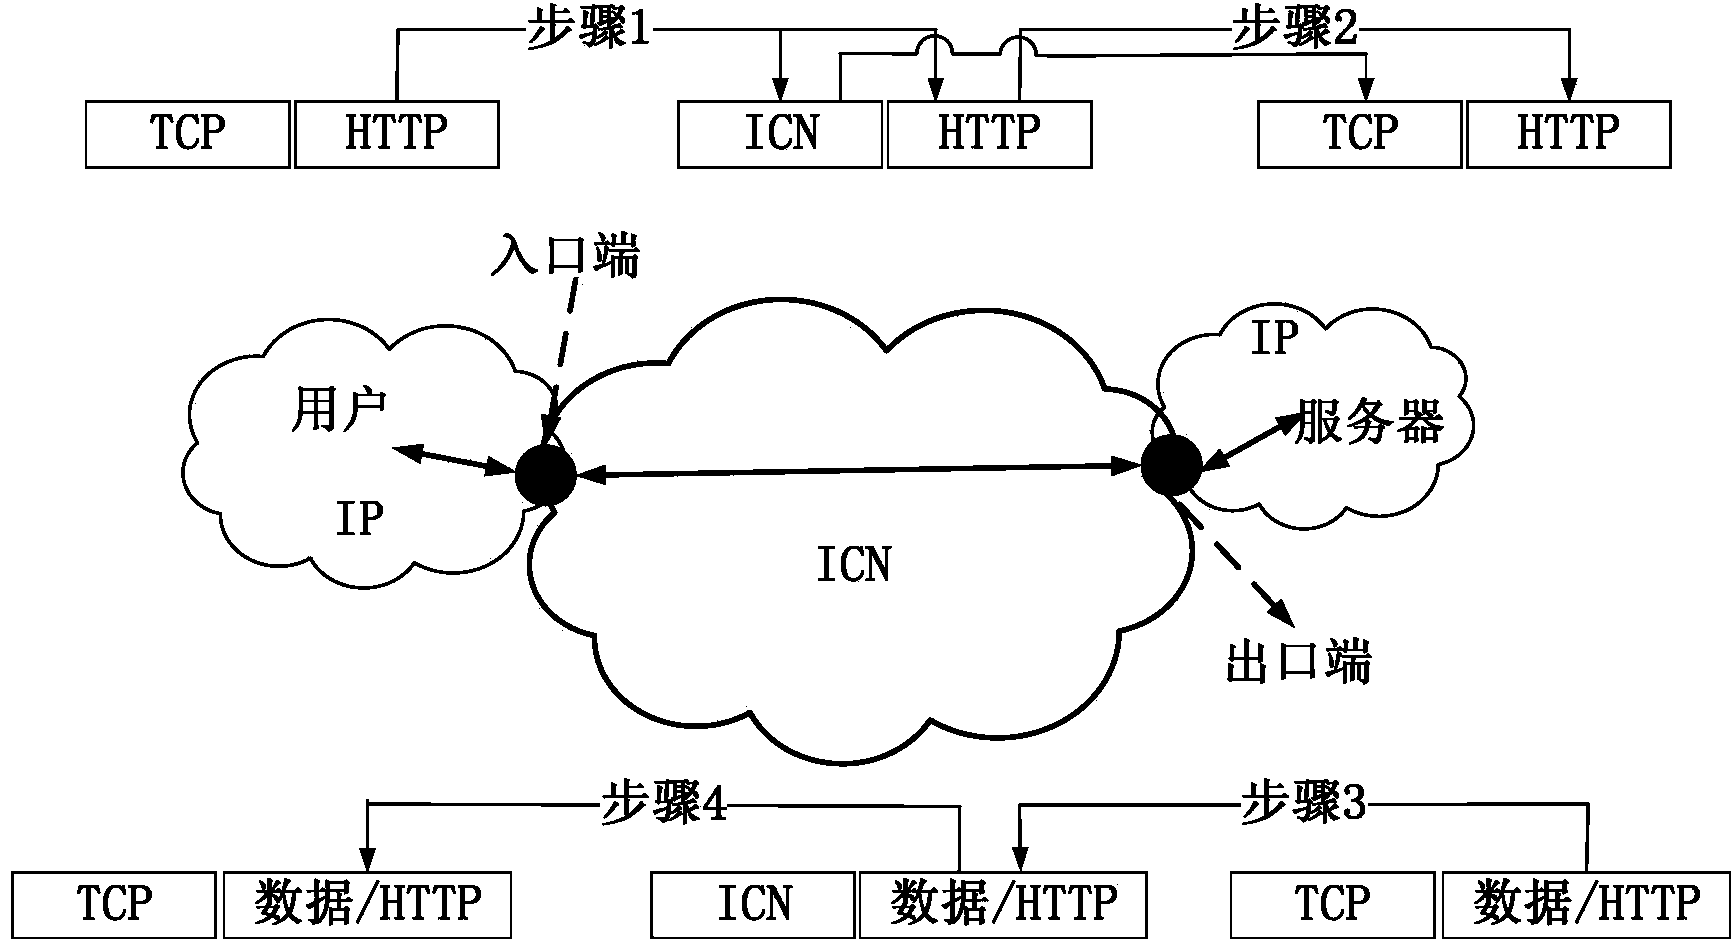 Method and system for mapping HTTP service to information center network